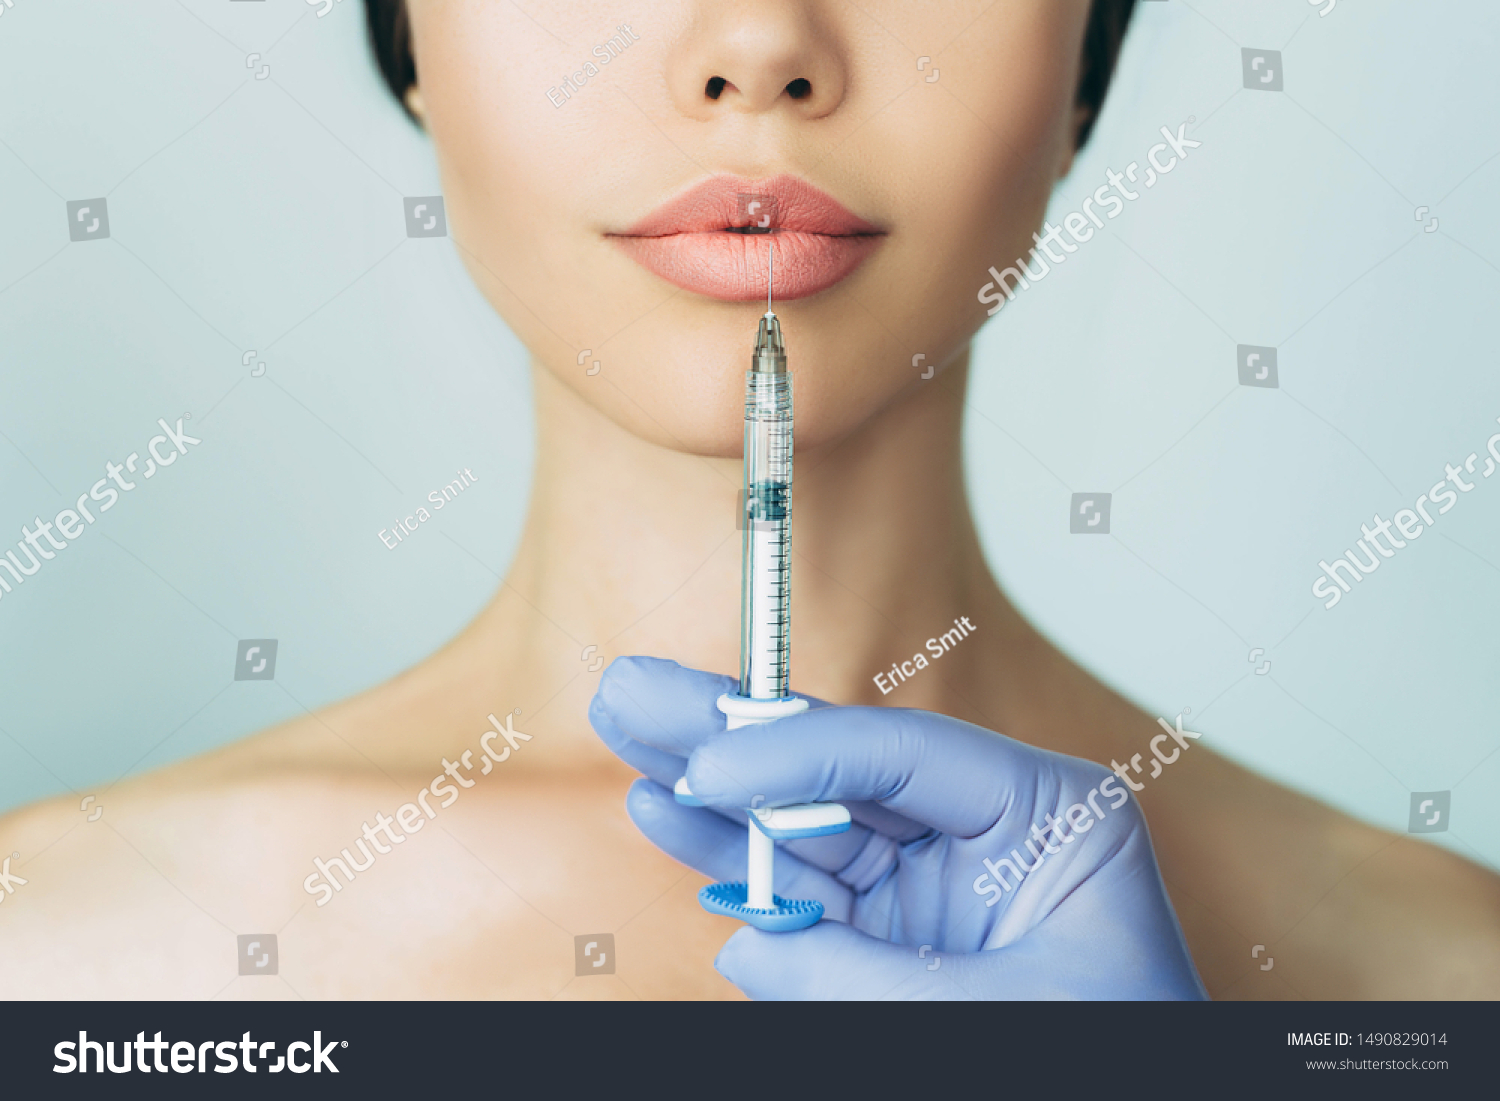 woman's plumper lips, getting bigger lips. prick of a syringe for the lips. injections for bigger volume #1490829014